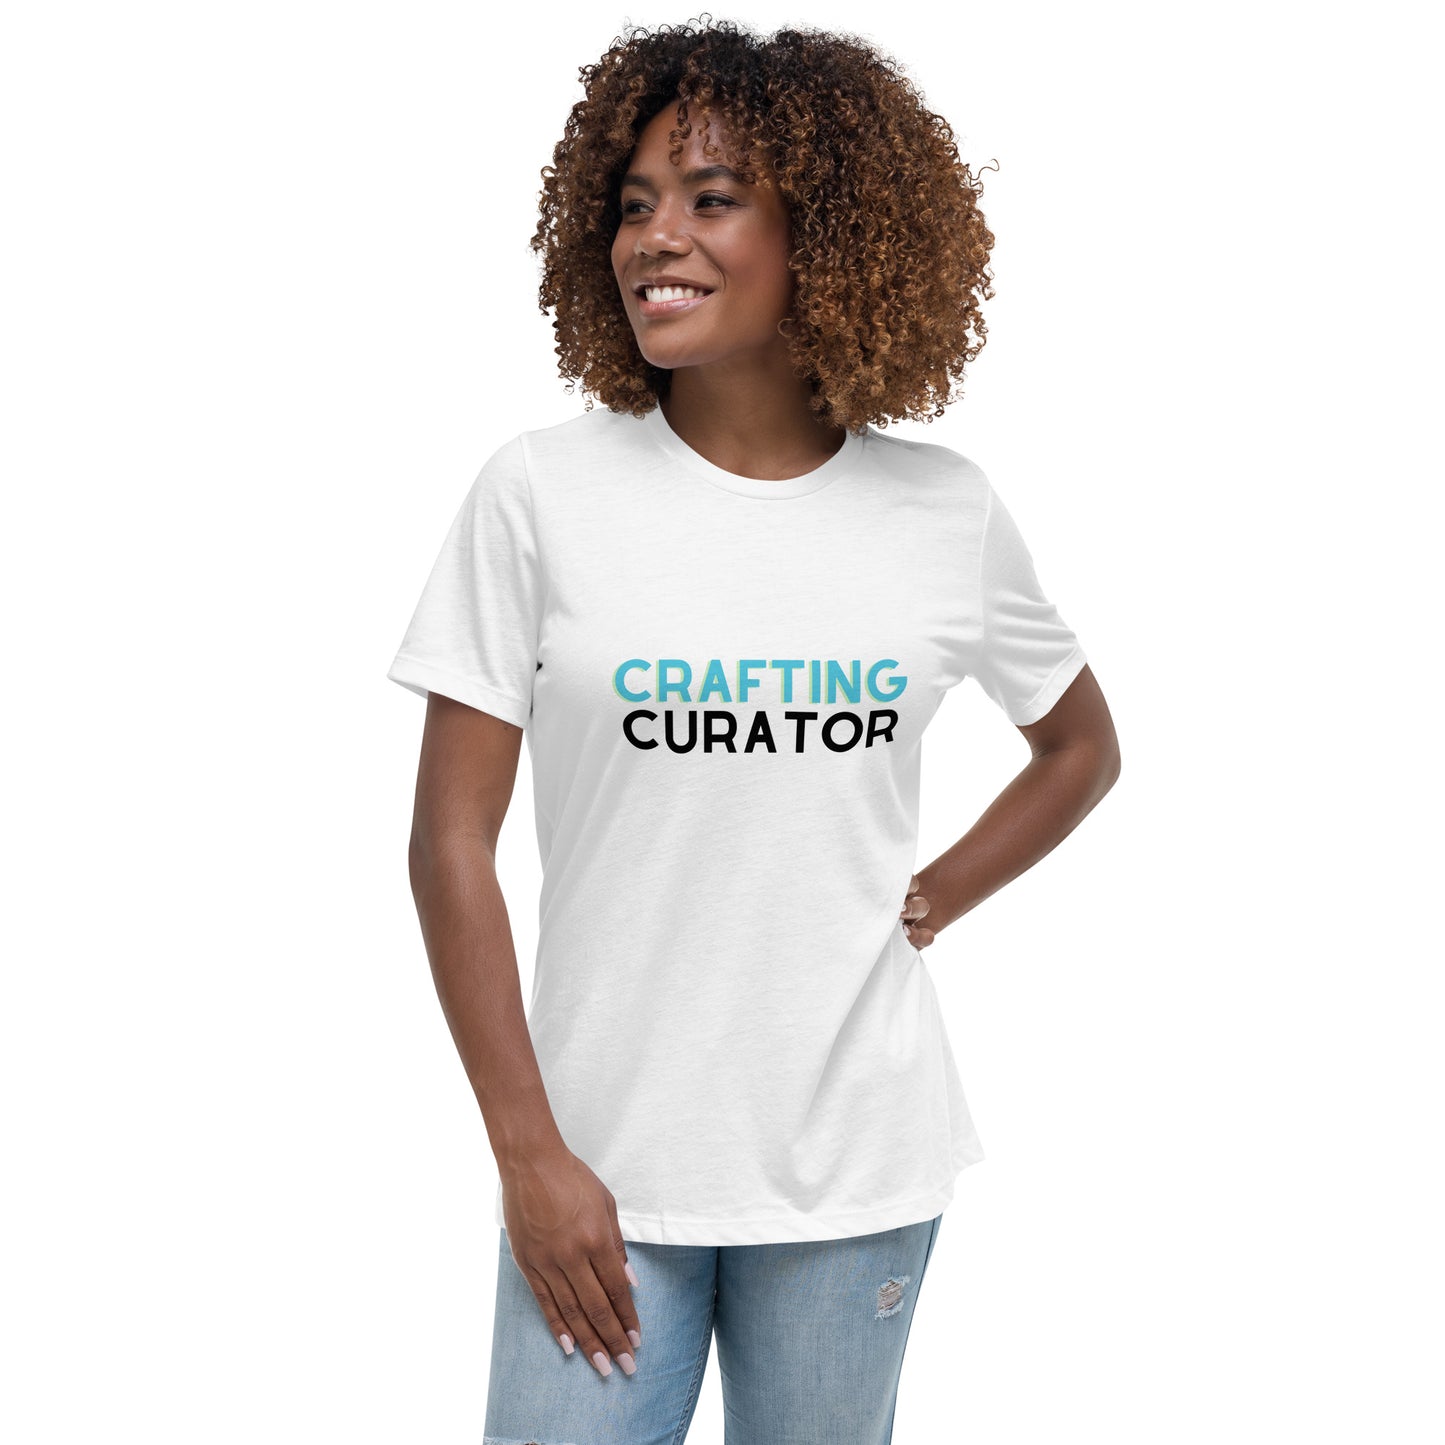 Crafting Curator Women's Relaxed T-Shirt